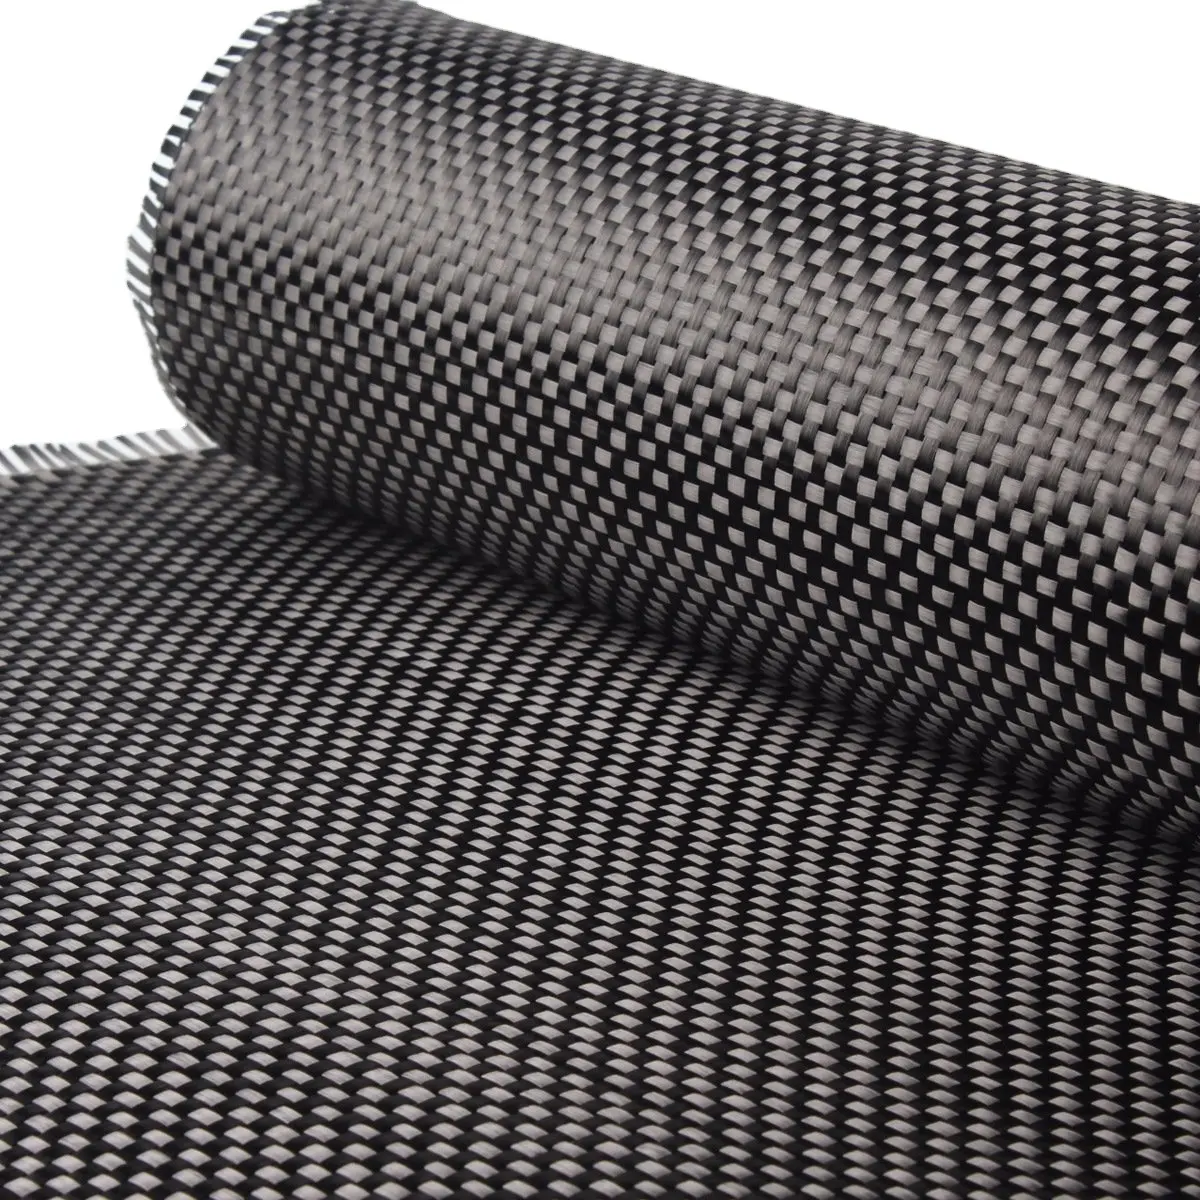 12K 320gsm plain and twill dry carbon fiber fabric construction used high tensile strength